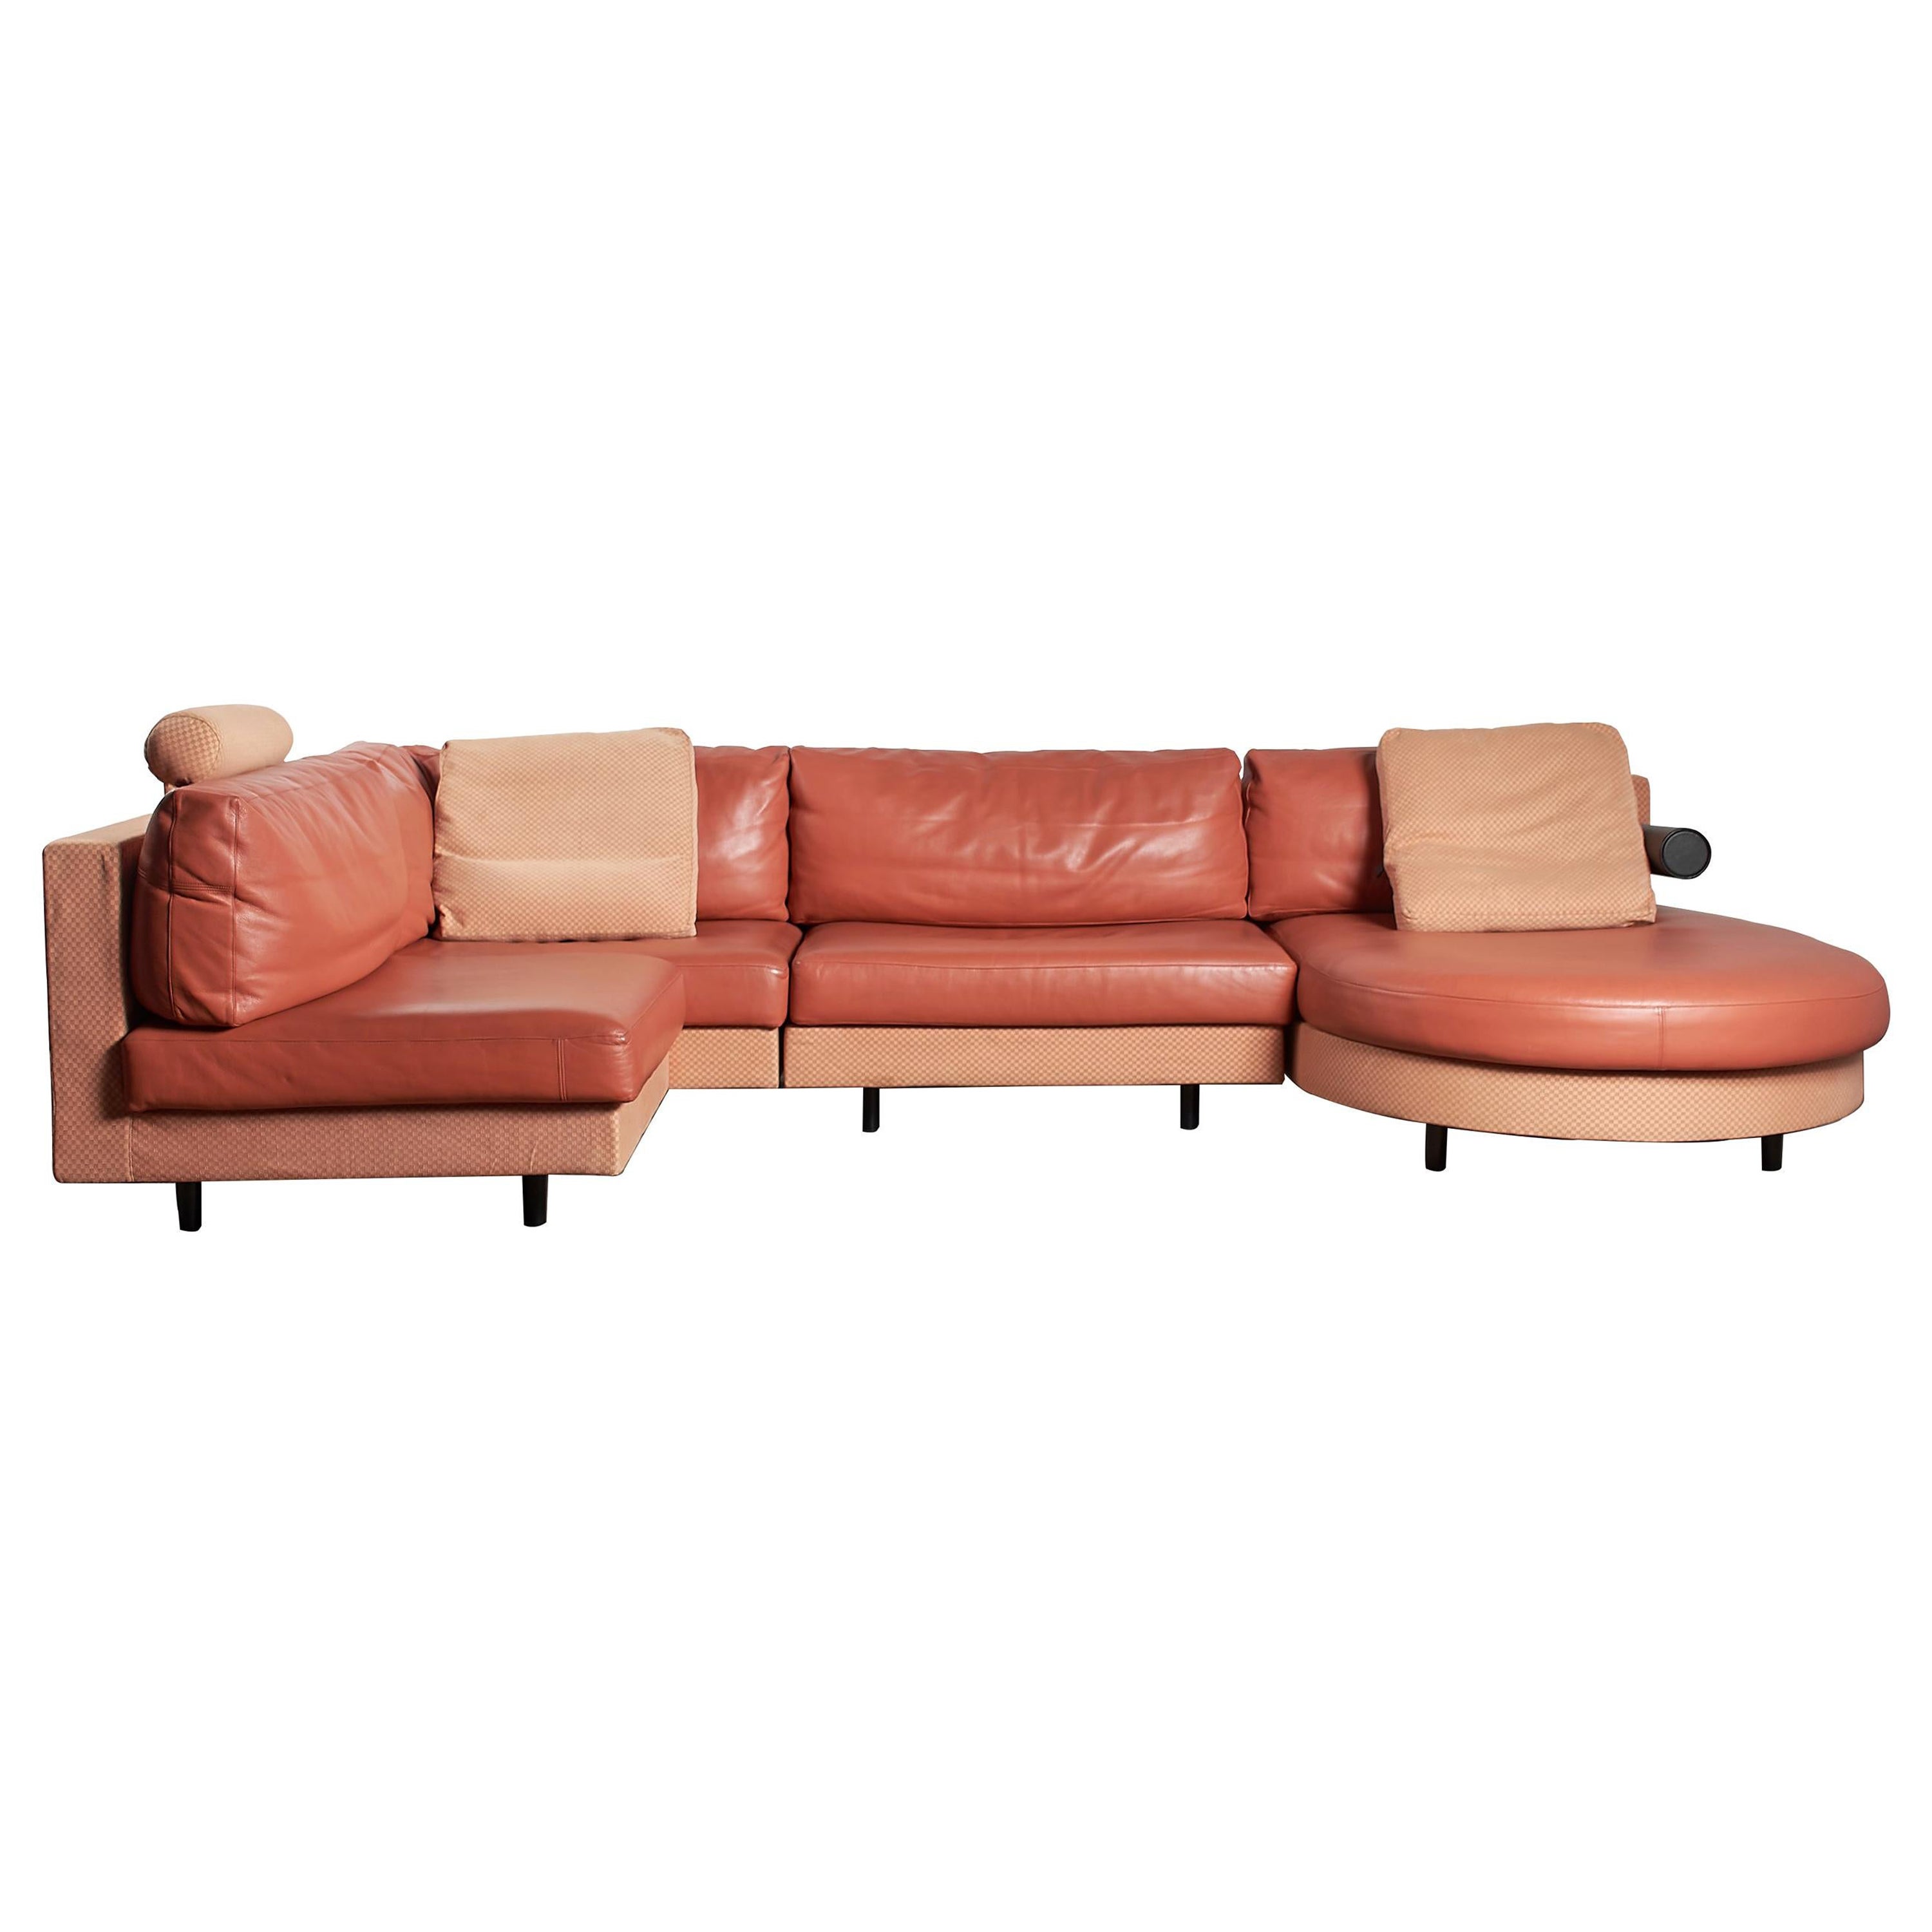 4-Piece "Sity" Sectional Sofa in Terracotta Leather by Citterio for B&B Italia